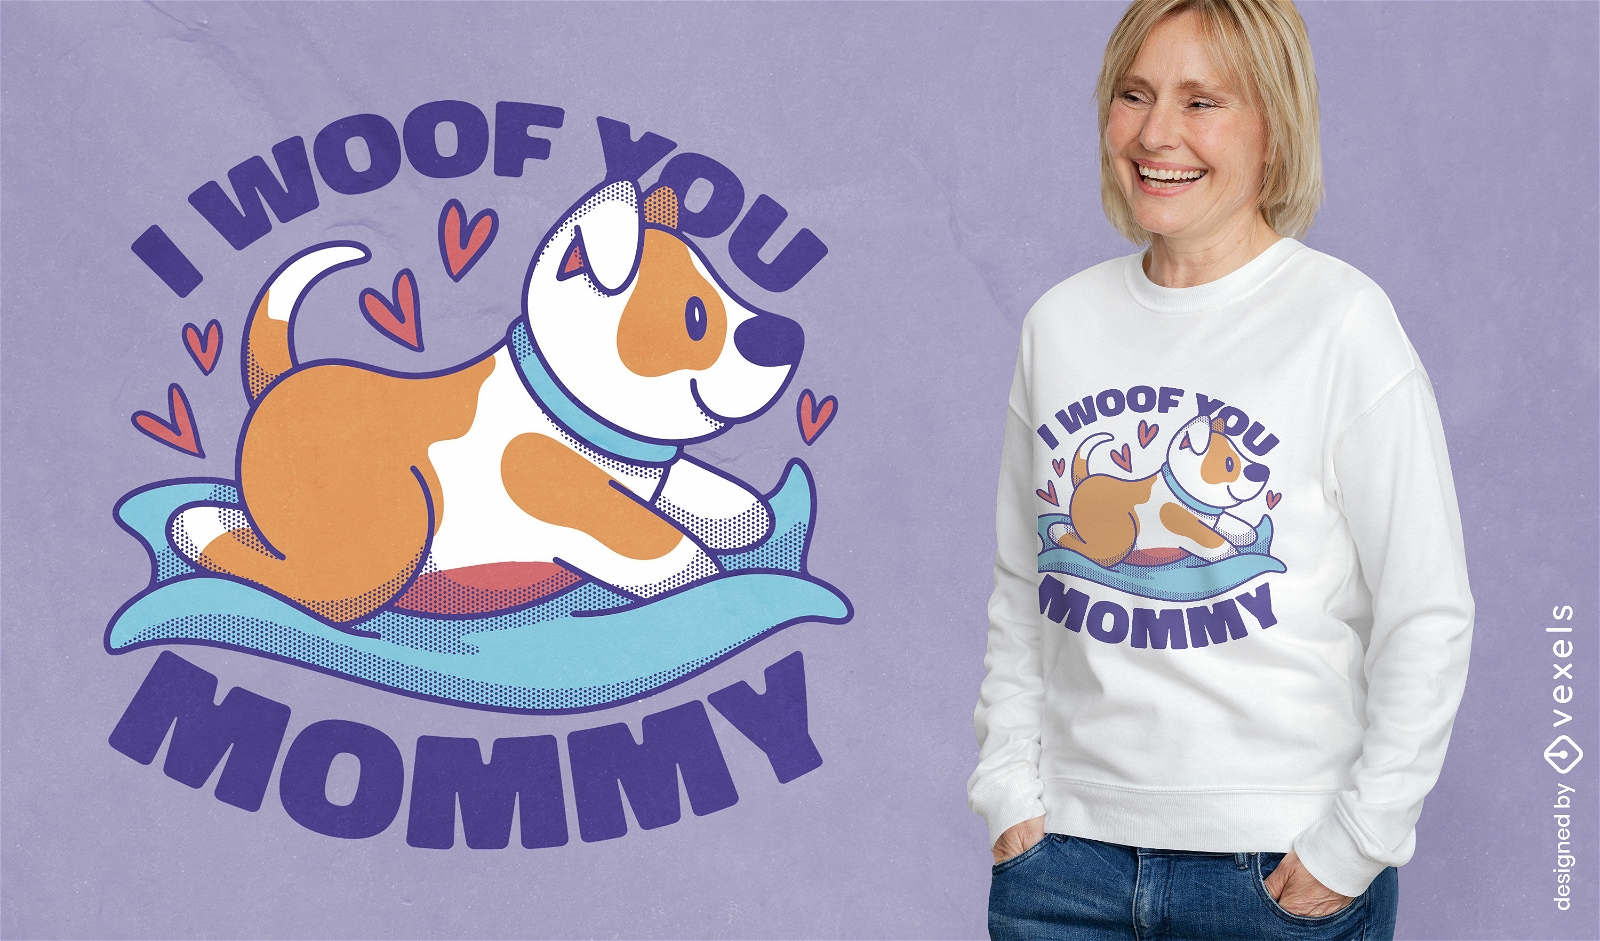 Dog mommy quote t-shirt design